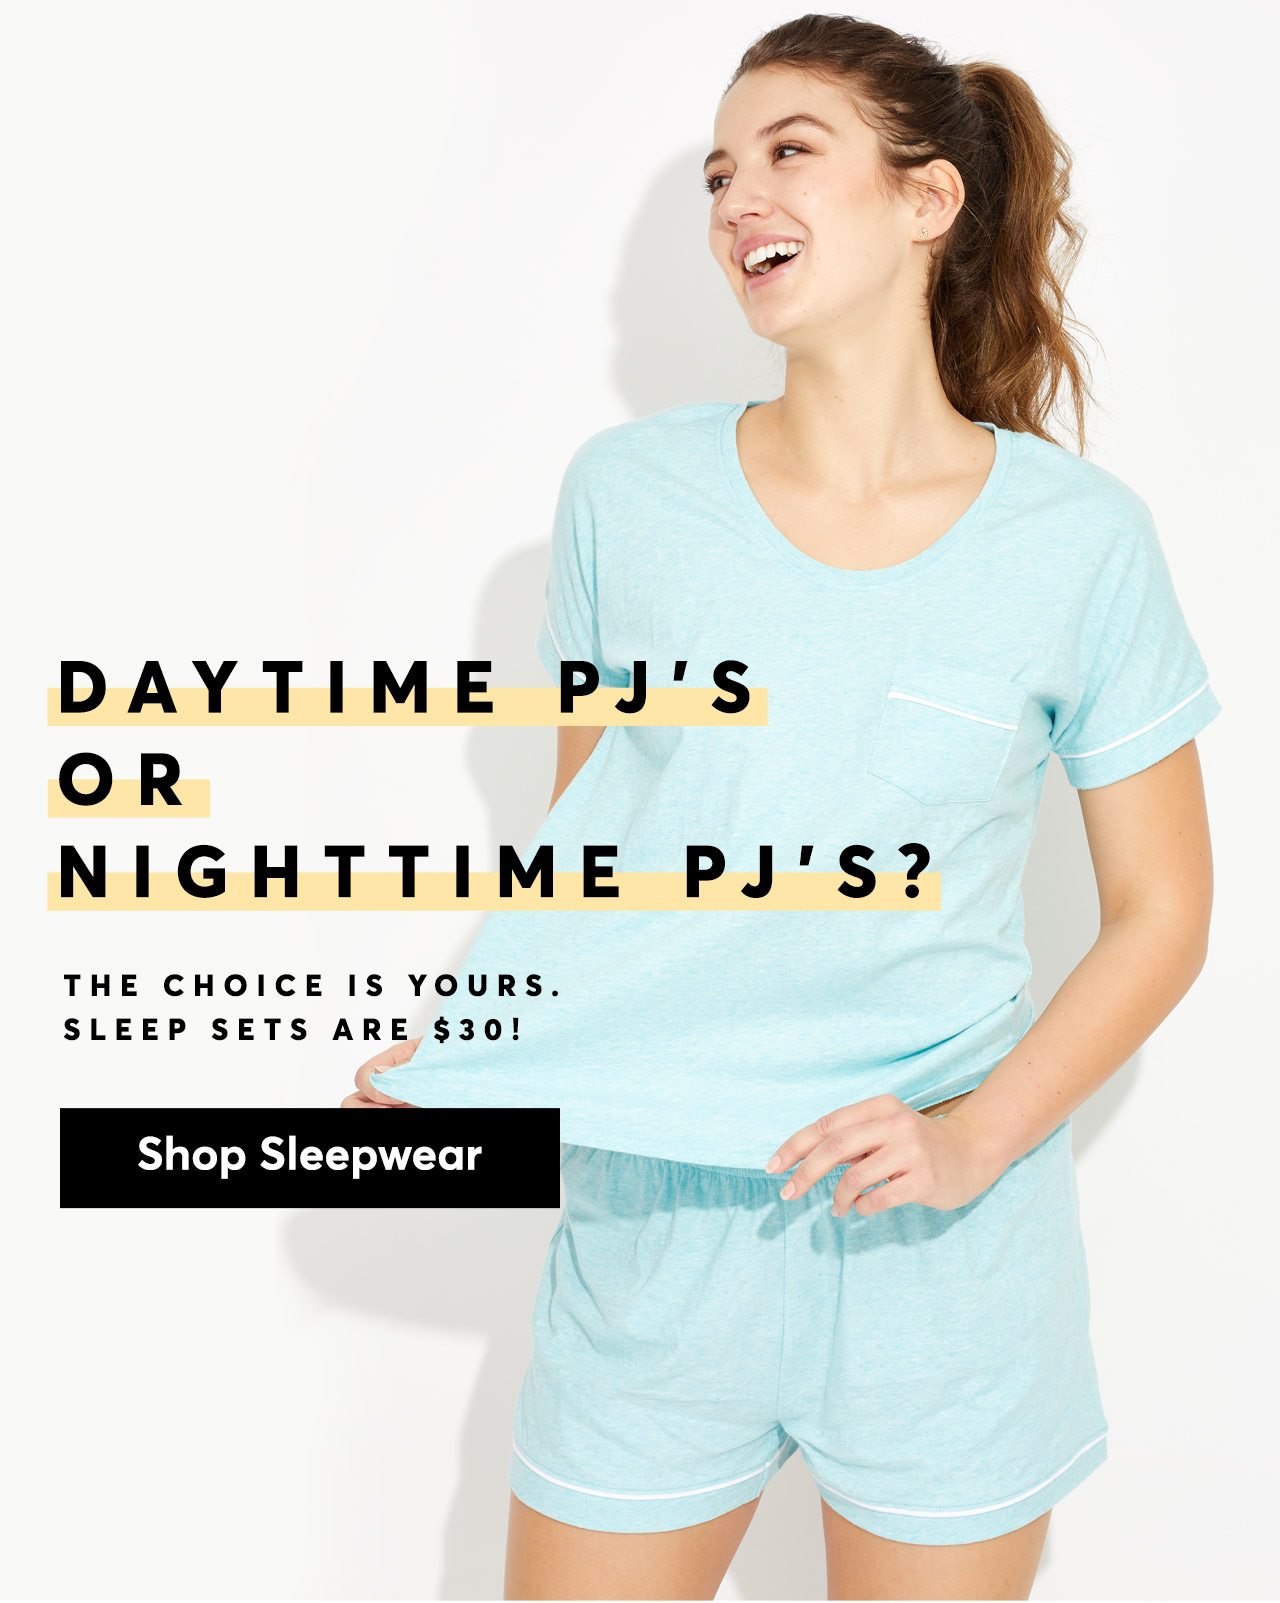 Daytime PJ's or Nighttime PJ's? The choice is yours. Sleep Sets are $30! Shop Sleepwear